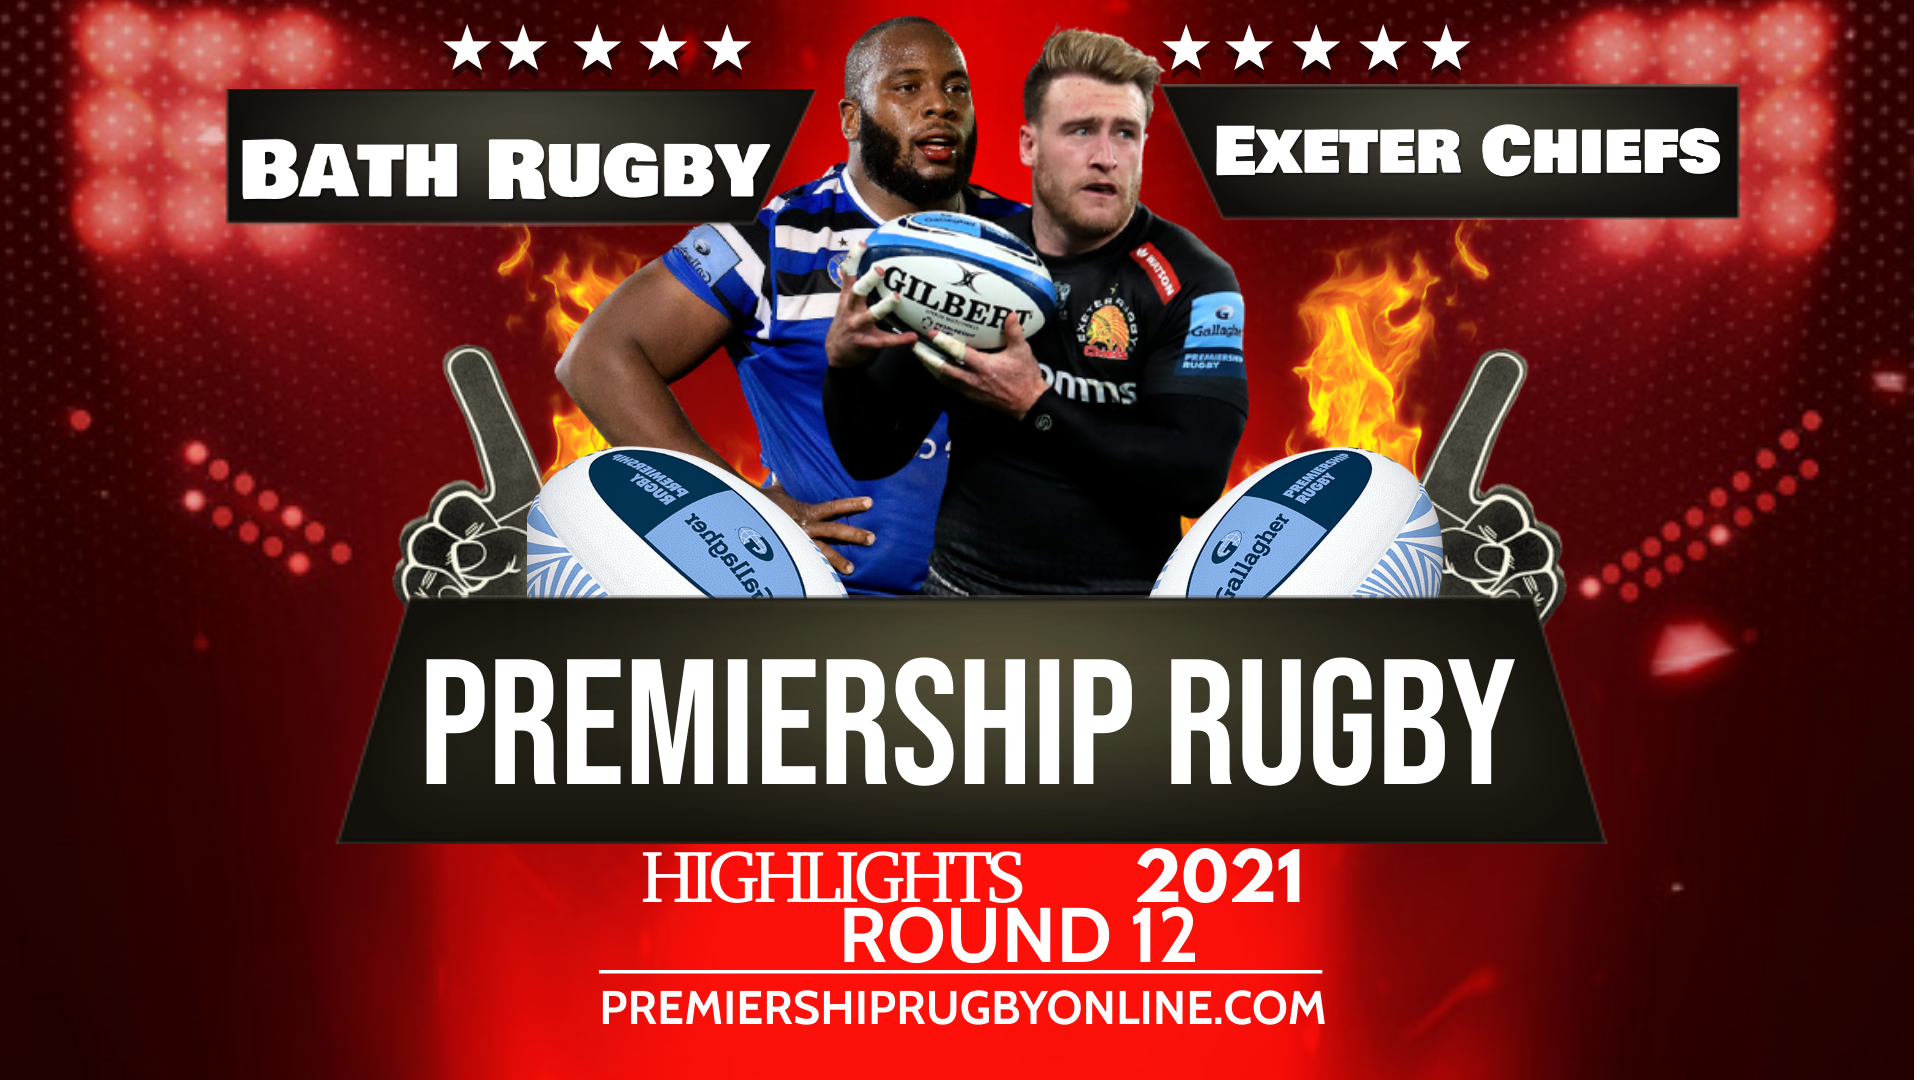 Bath Rugby Vs Exeter Chiefs Highlights 2021 RD 12